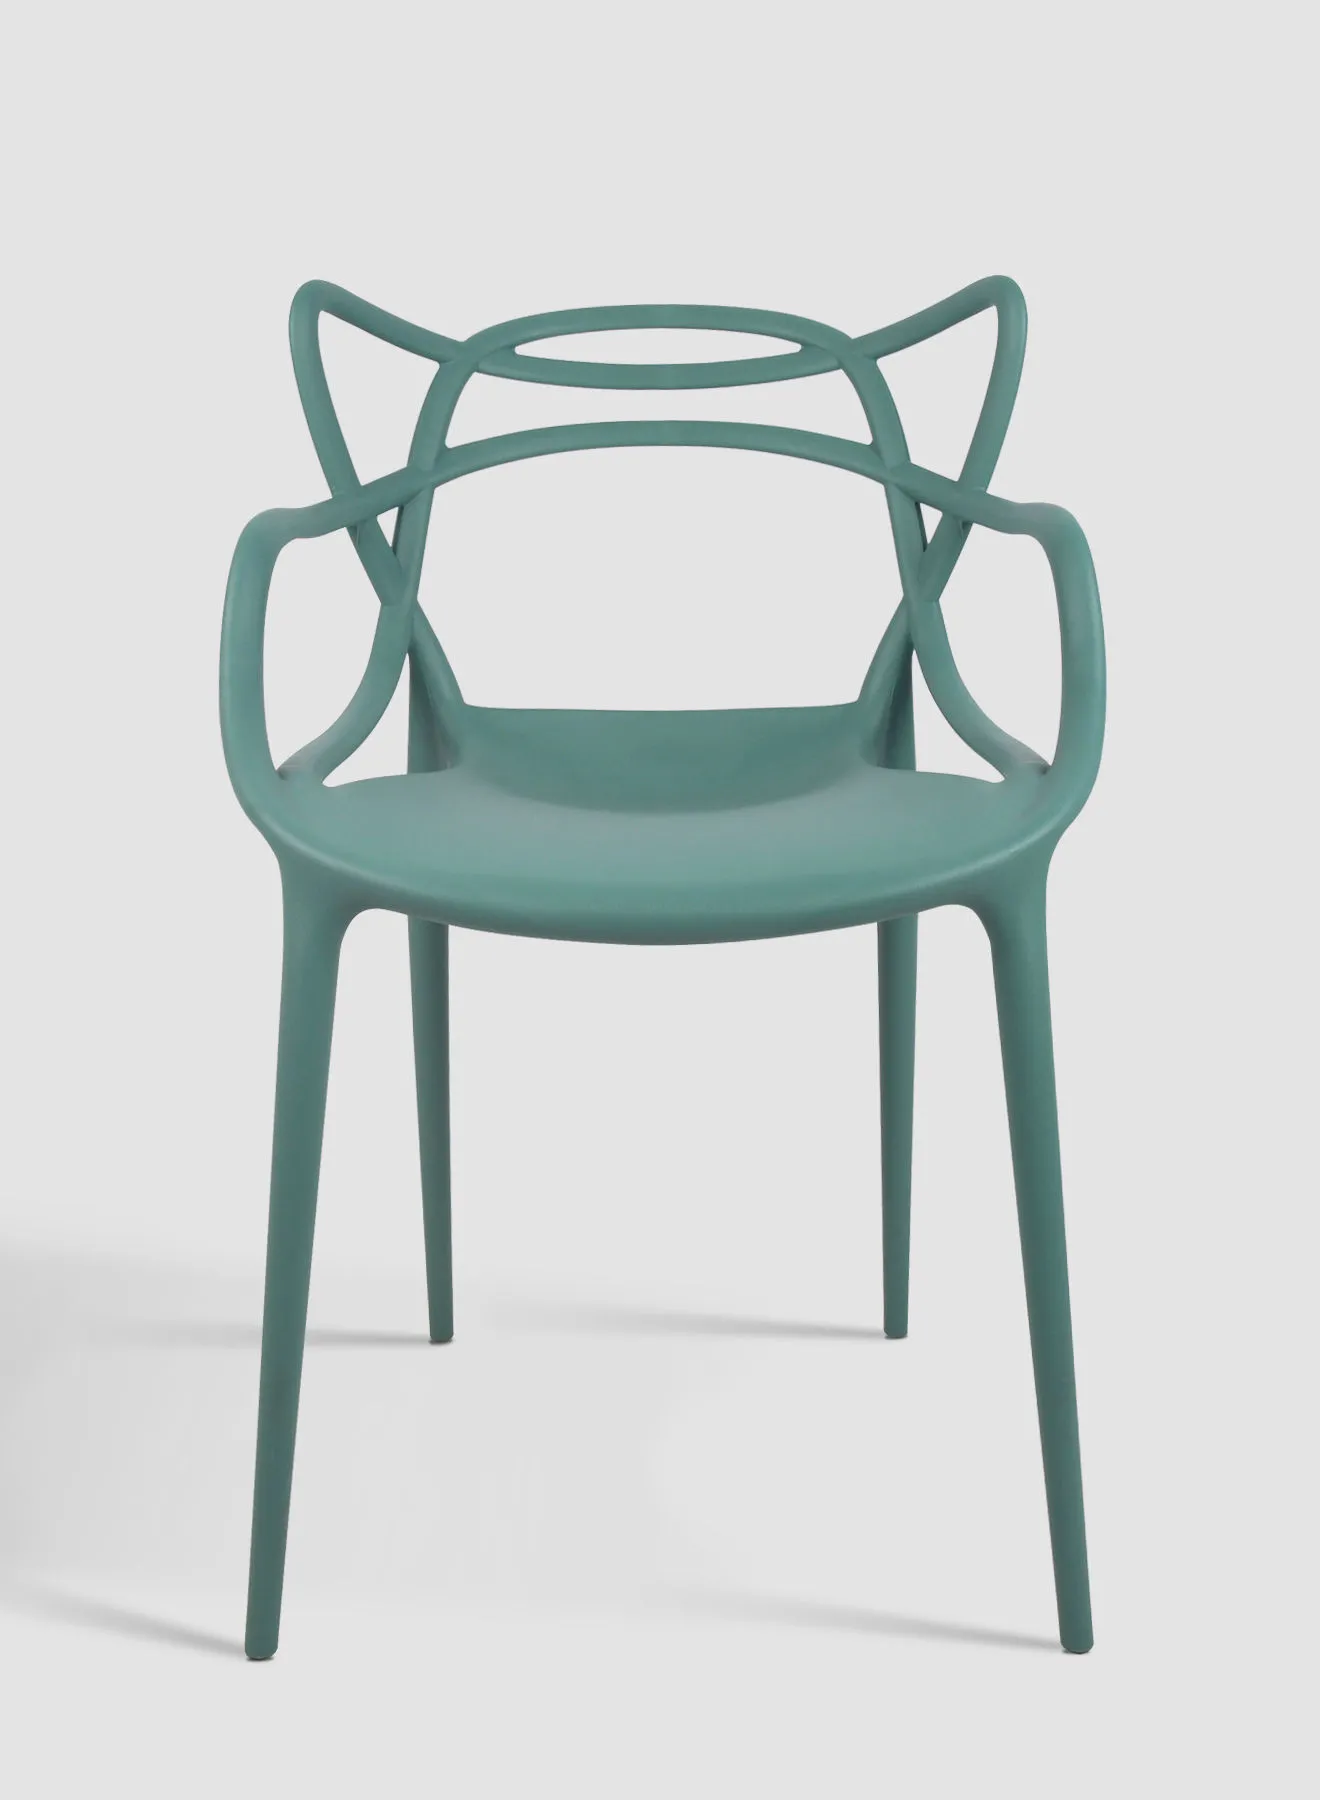 Switch Dining Chair In Aqua Plastic Chair Size 57 X 53 X 82